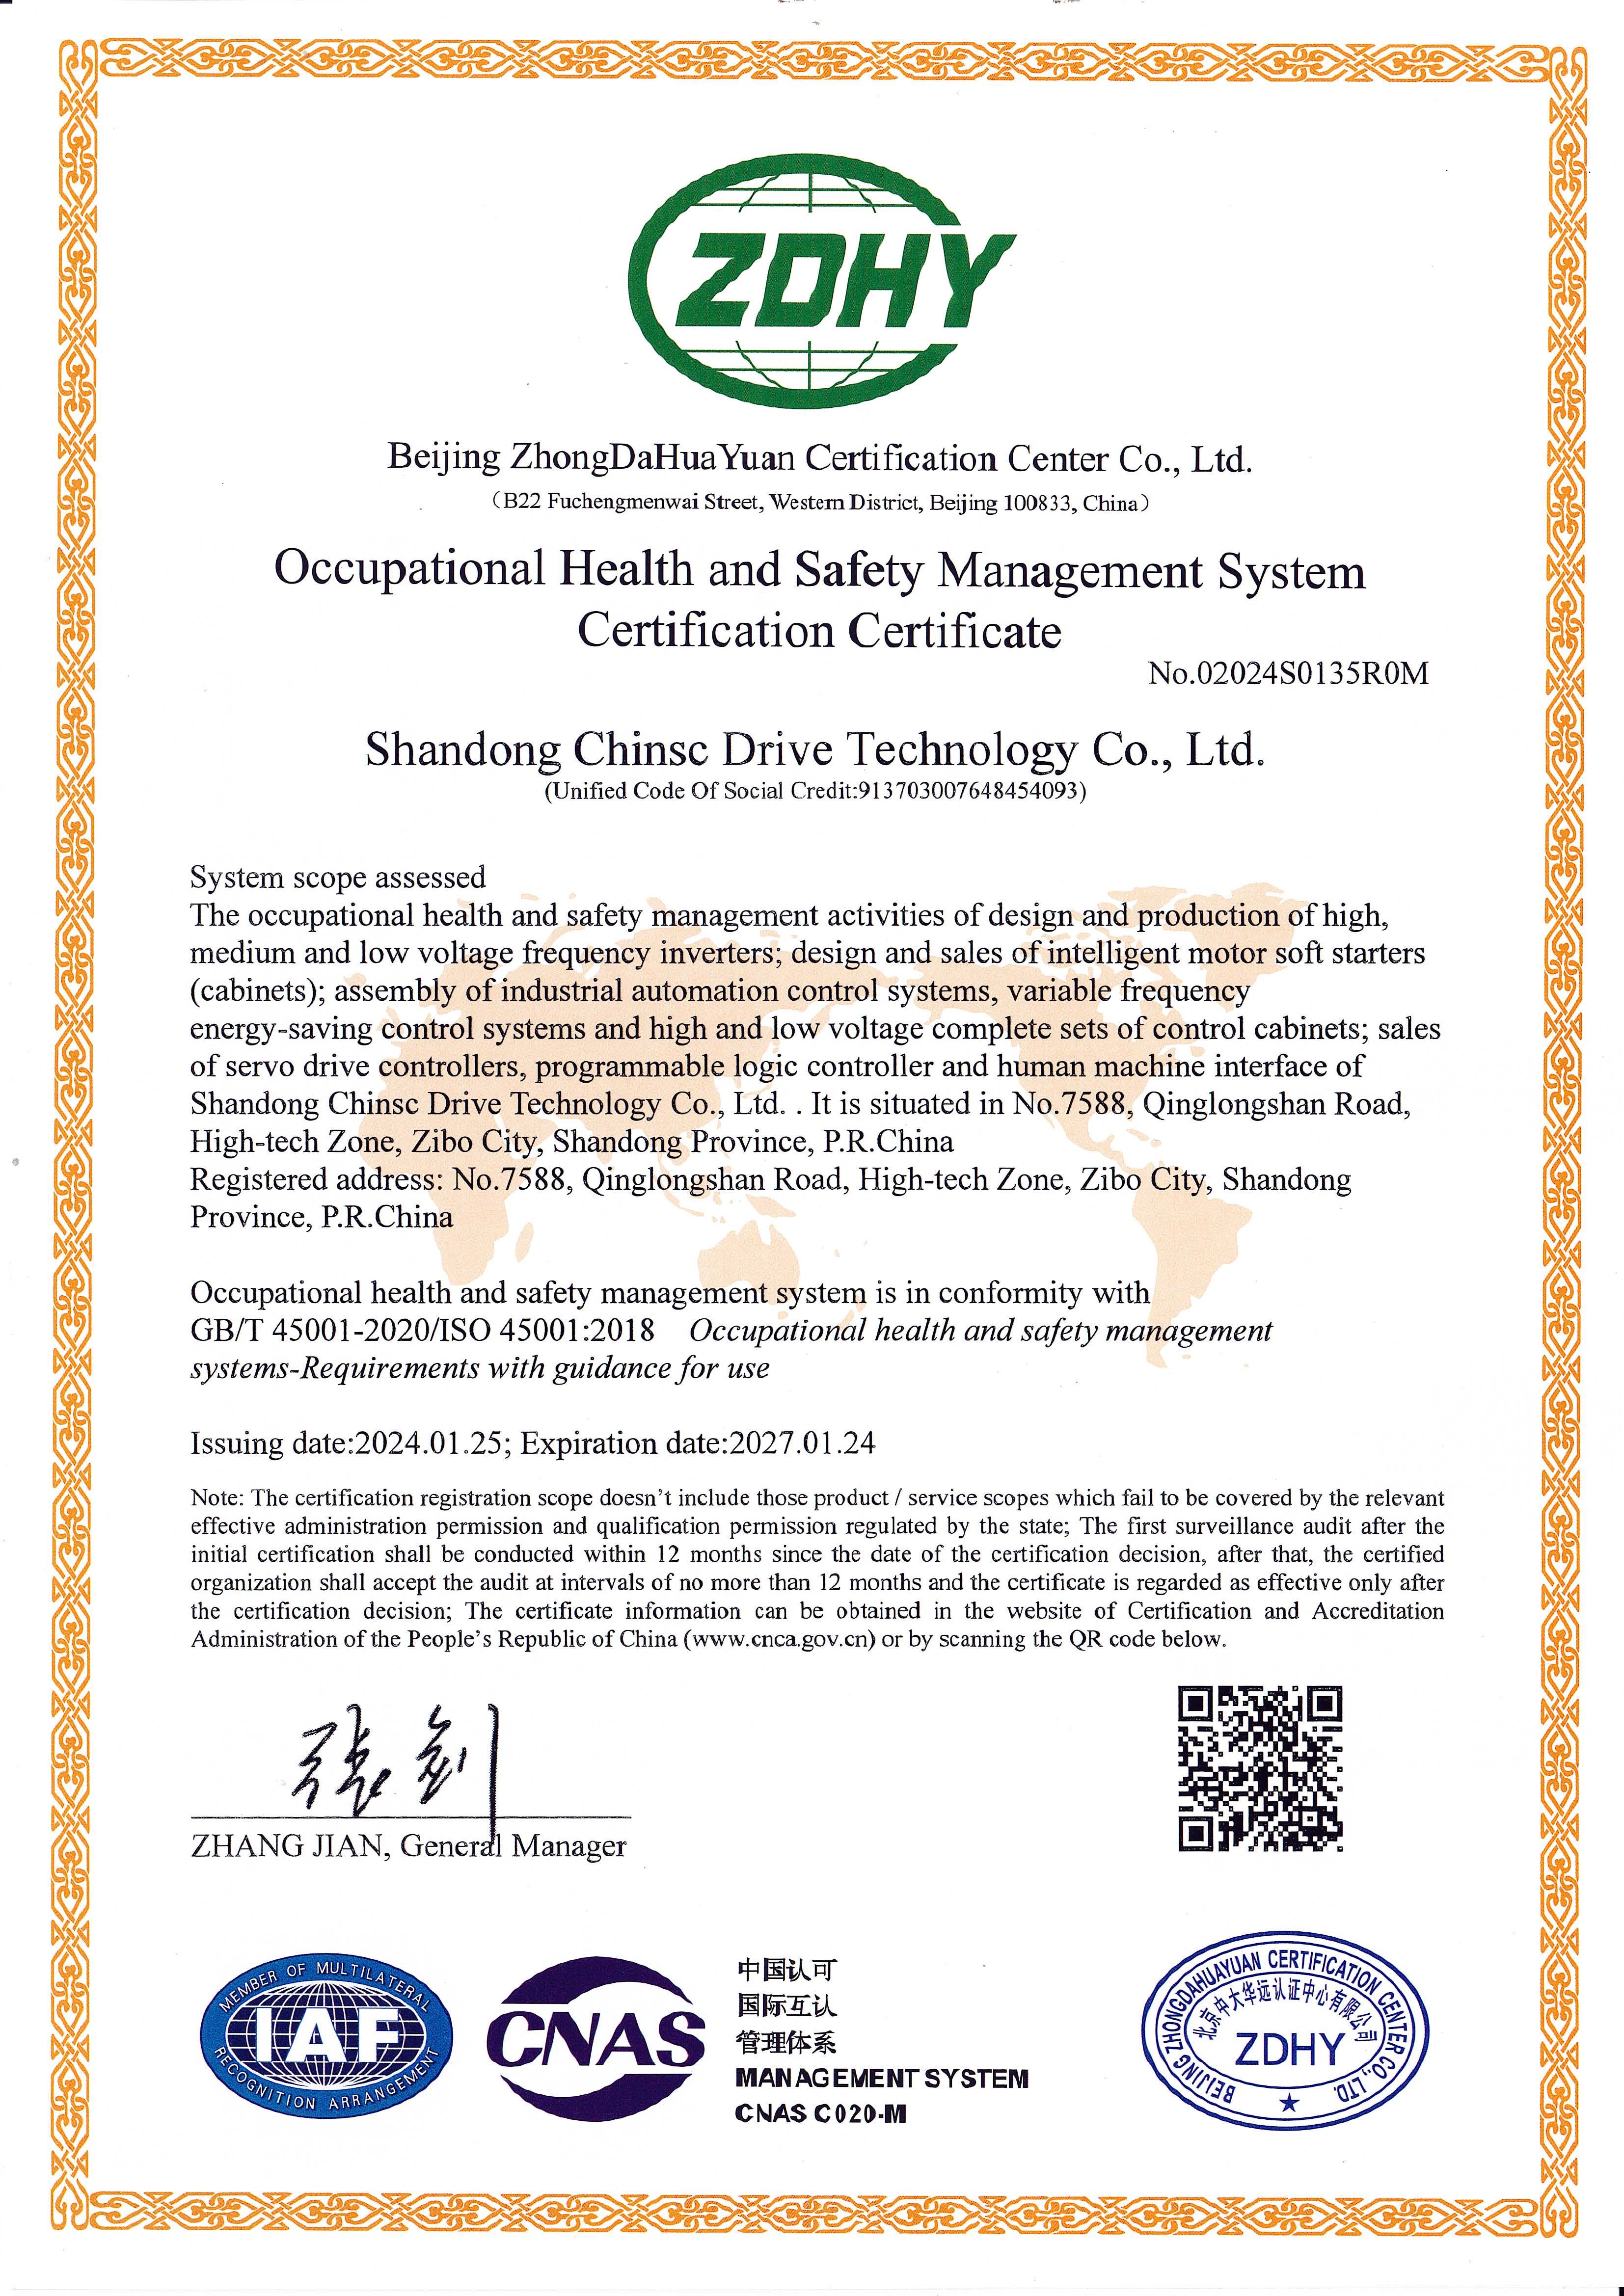 The Authentication Certificate of Occupational Health and Safety Management System